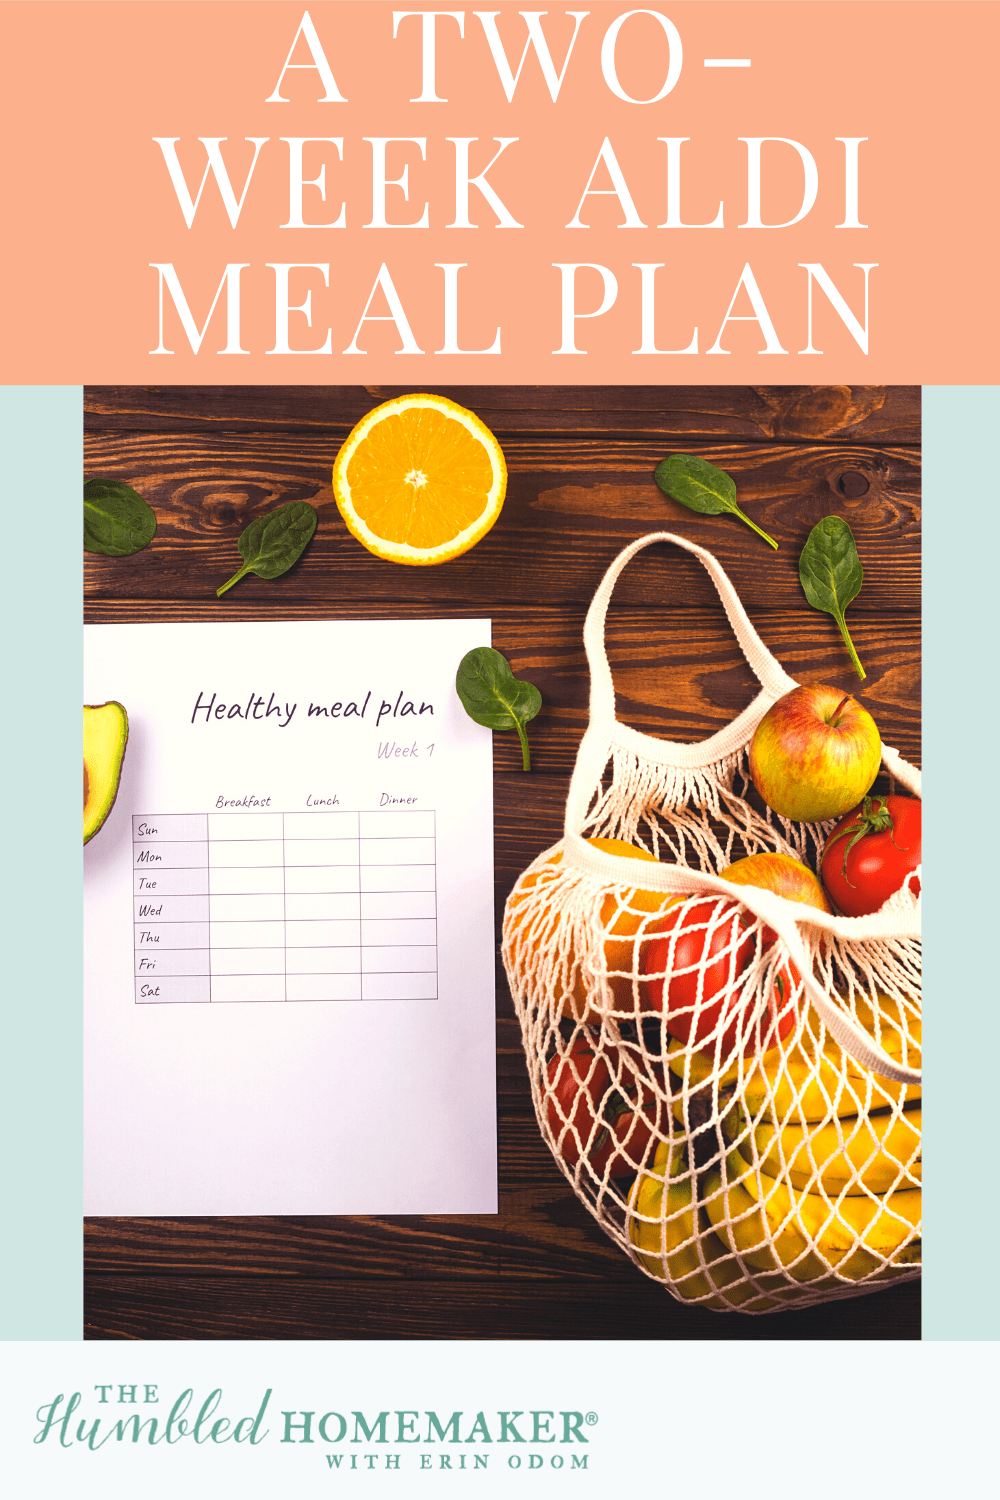 I save so much money on groceries by shopping at Aldi! Check out this two-week Aldi meal plan and save on your family’s food budget!